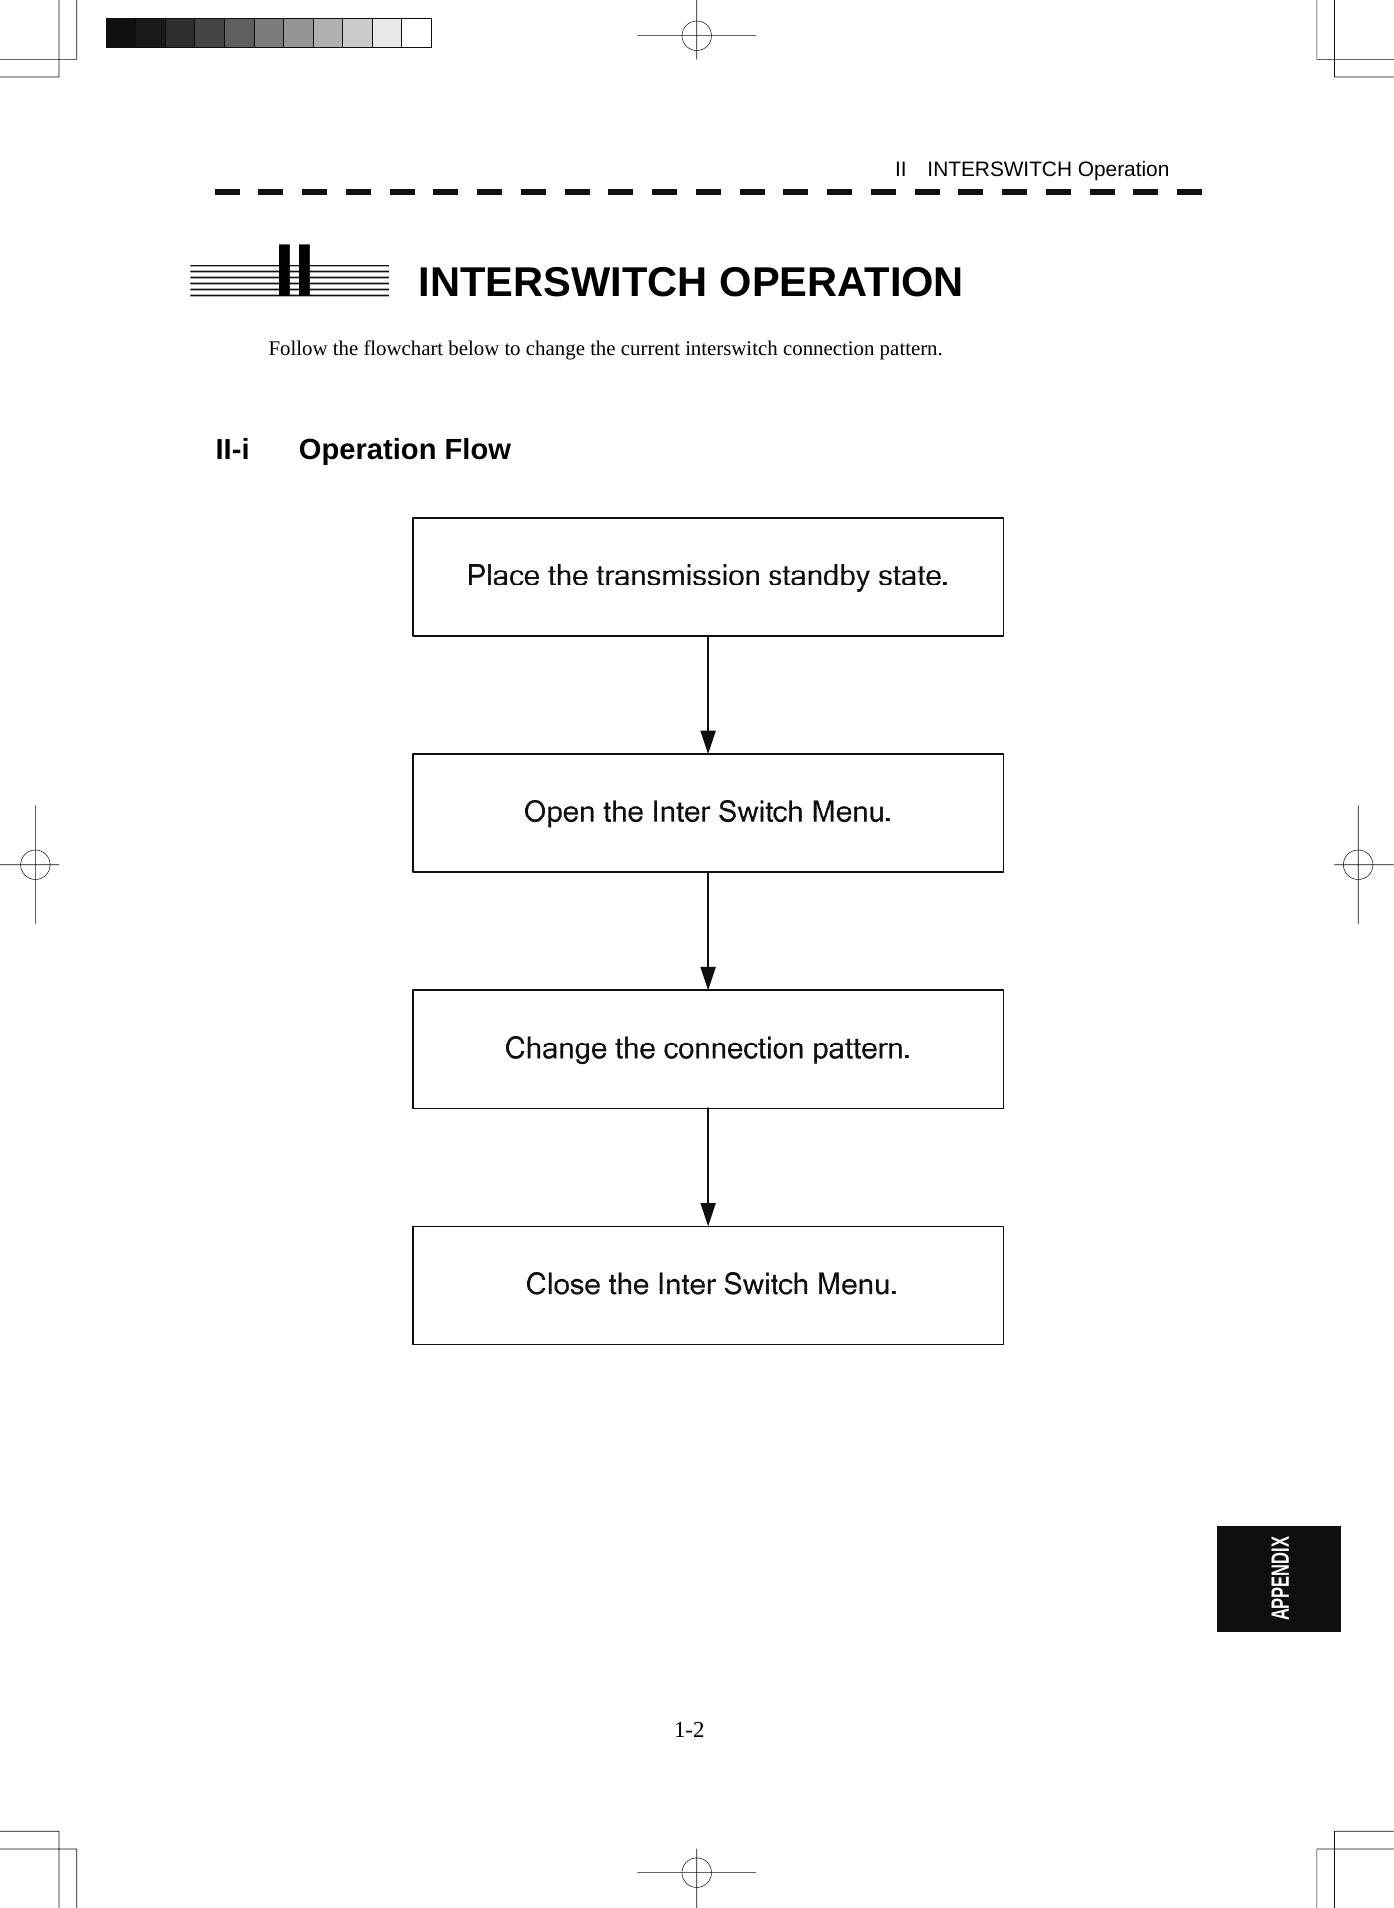  1-2 II  INTERSWITCH Operation APPENDIX II  INTERSWITCH OPERATION  Follow the flowchart below to change the current interswitch connection pattern.    II-i Operation Flow    